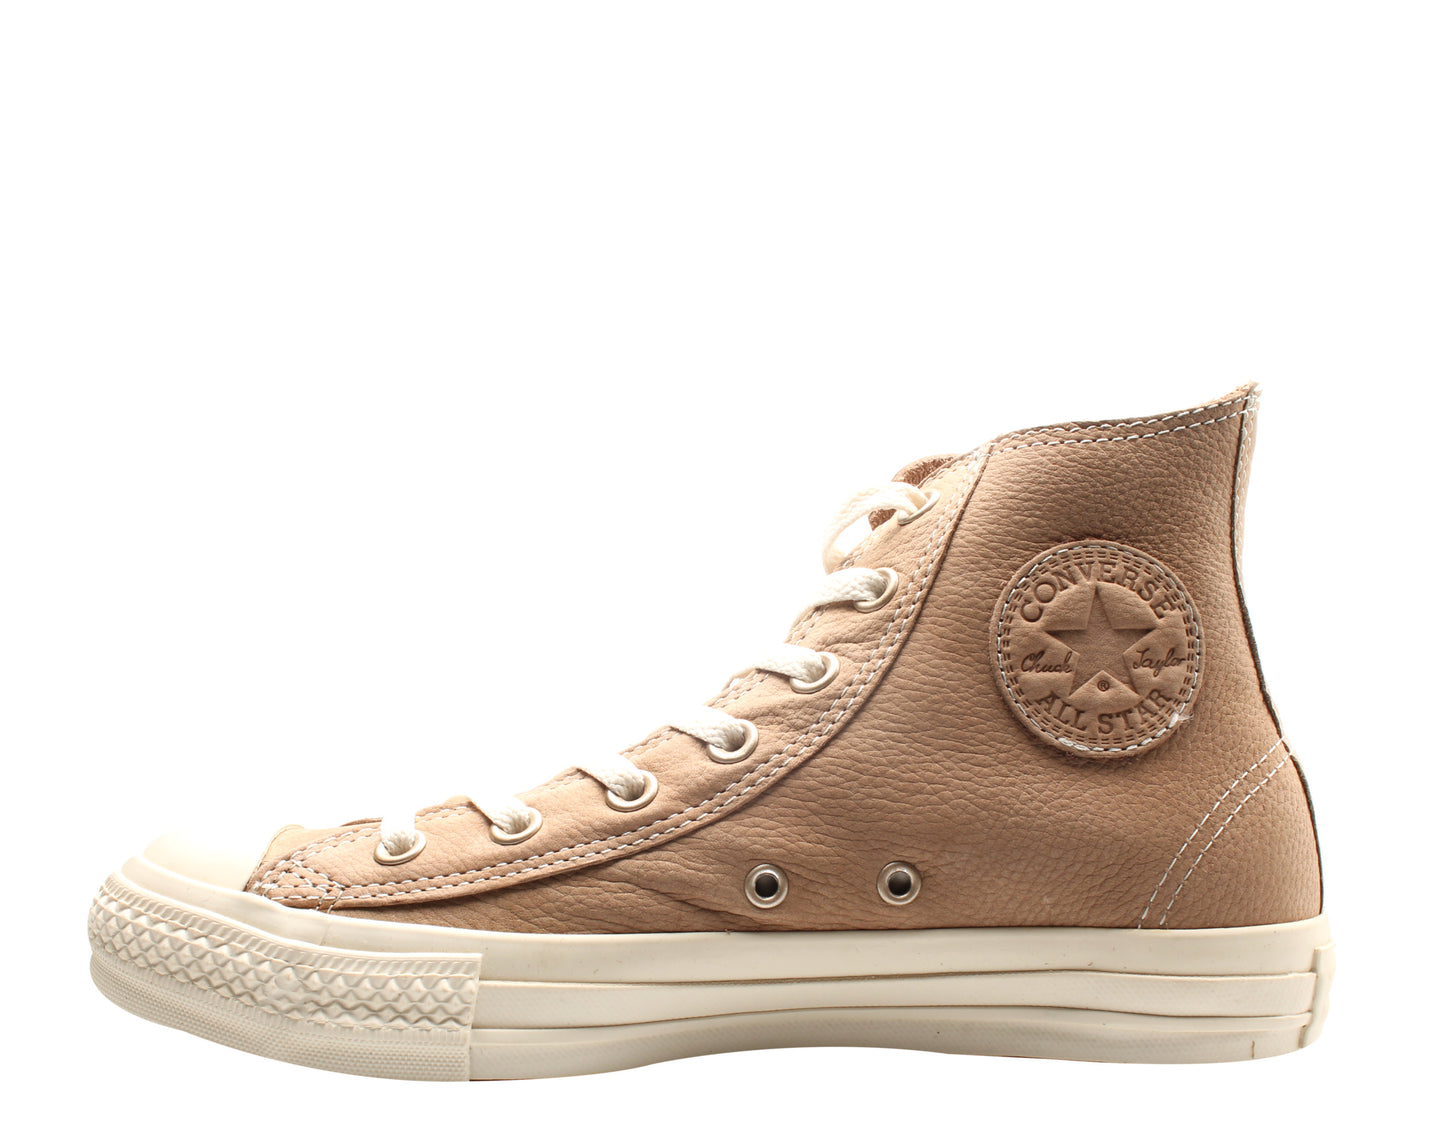 Converse Chuck Taylor All Star Special Leather Hi Sneakers